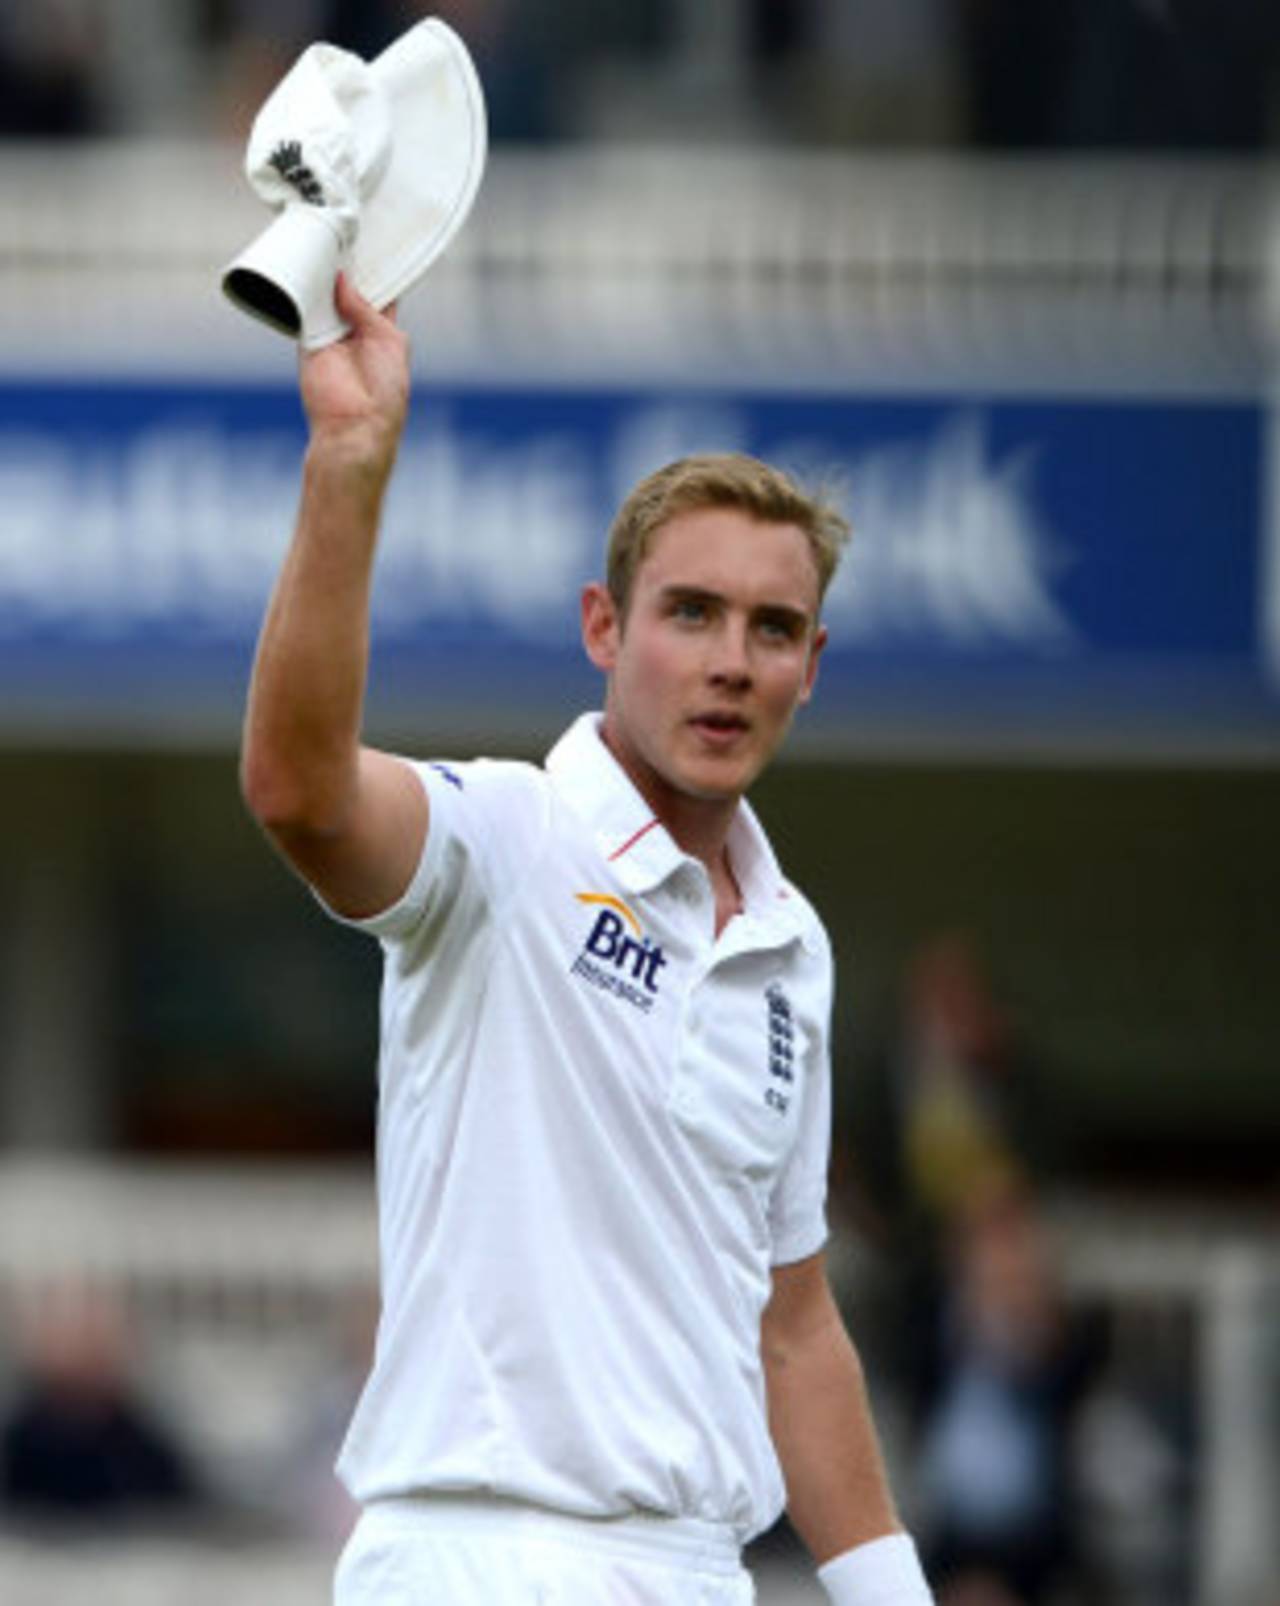 Stuart Broad seems to be on the brink of great things&nbsp;&nbsp;&bull;&nbsp;&nbsp;Getty Images